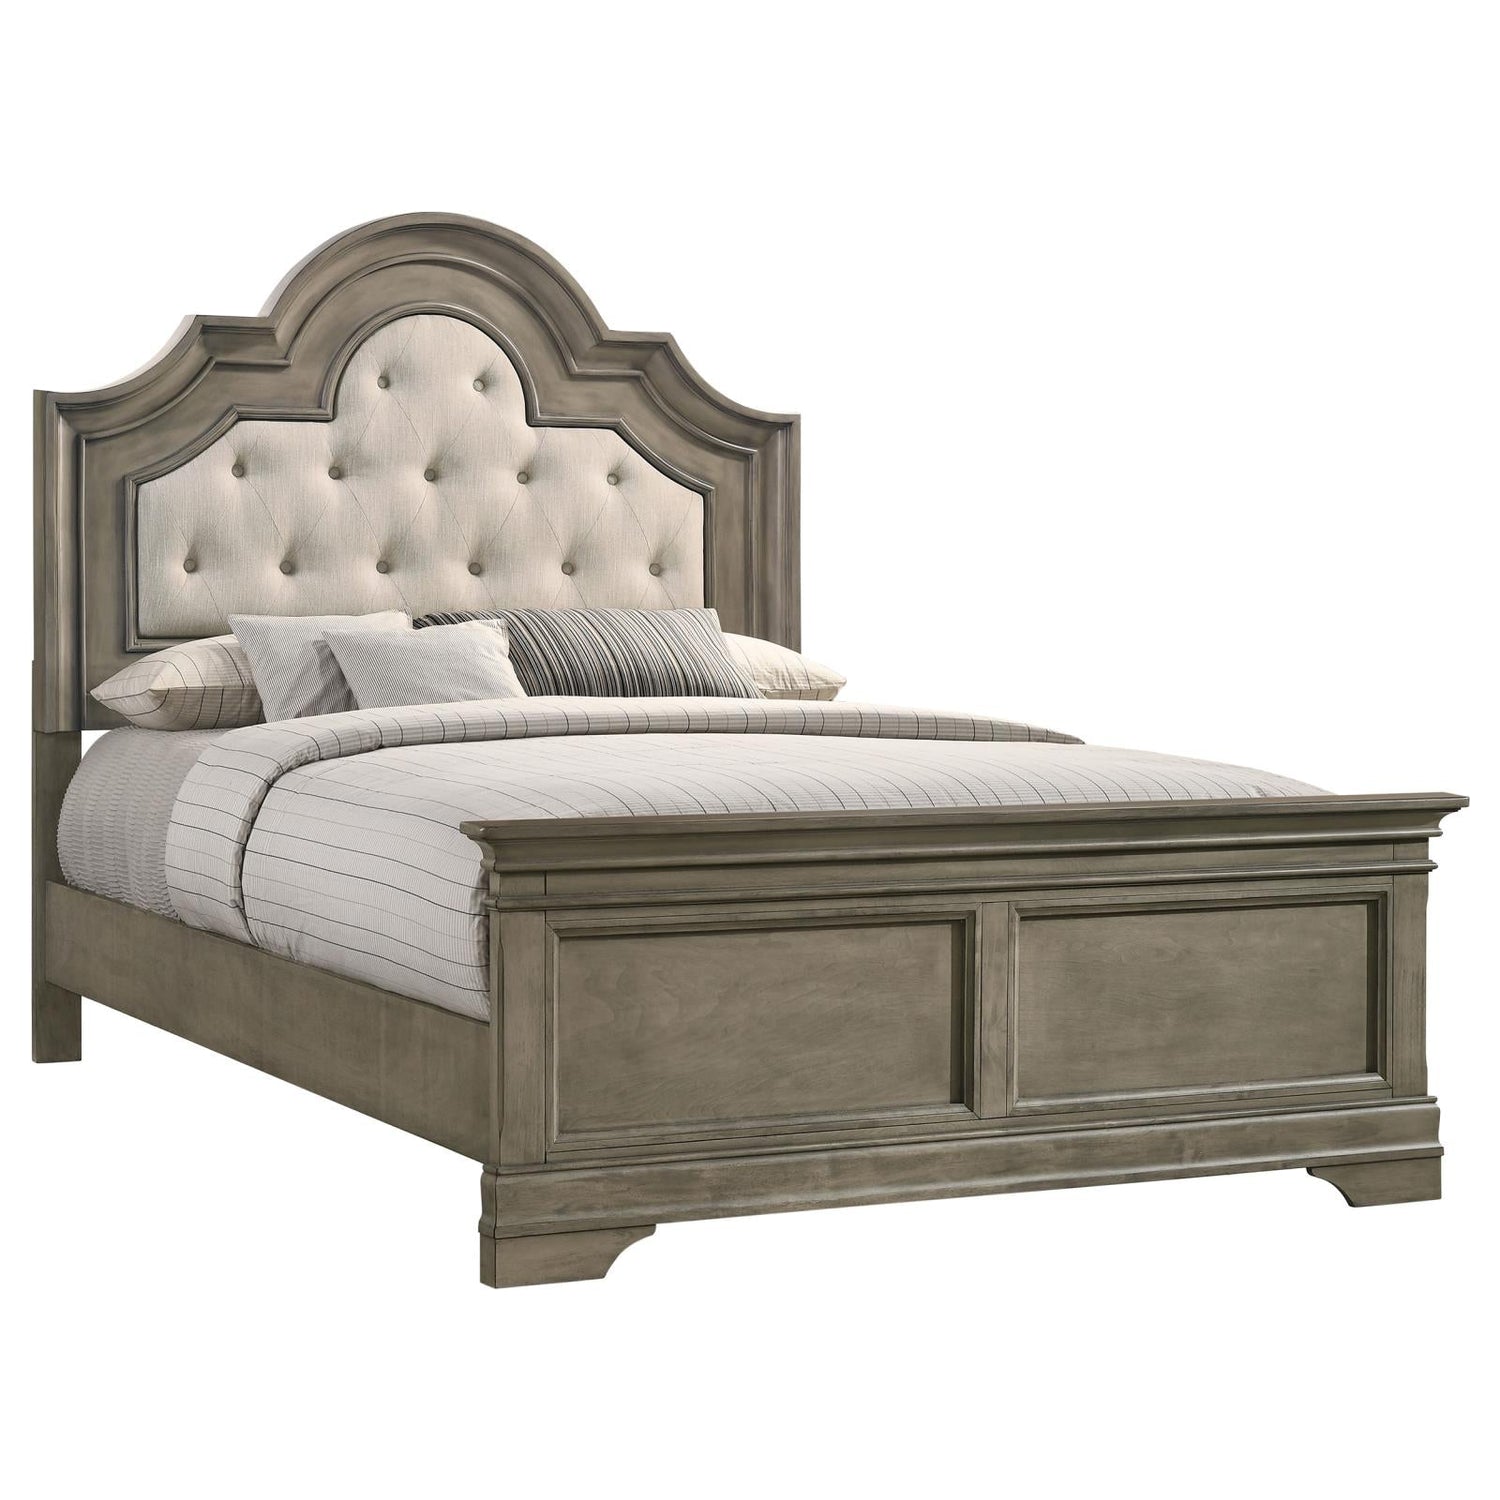 Manchester Bed with Upholstered Arched Headboard Beige/Wheat - 222891Q - Bien Home Furniture &amp; Electronics